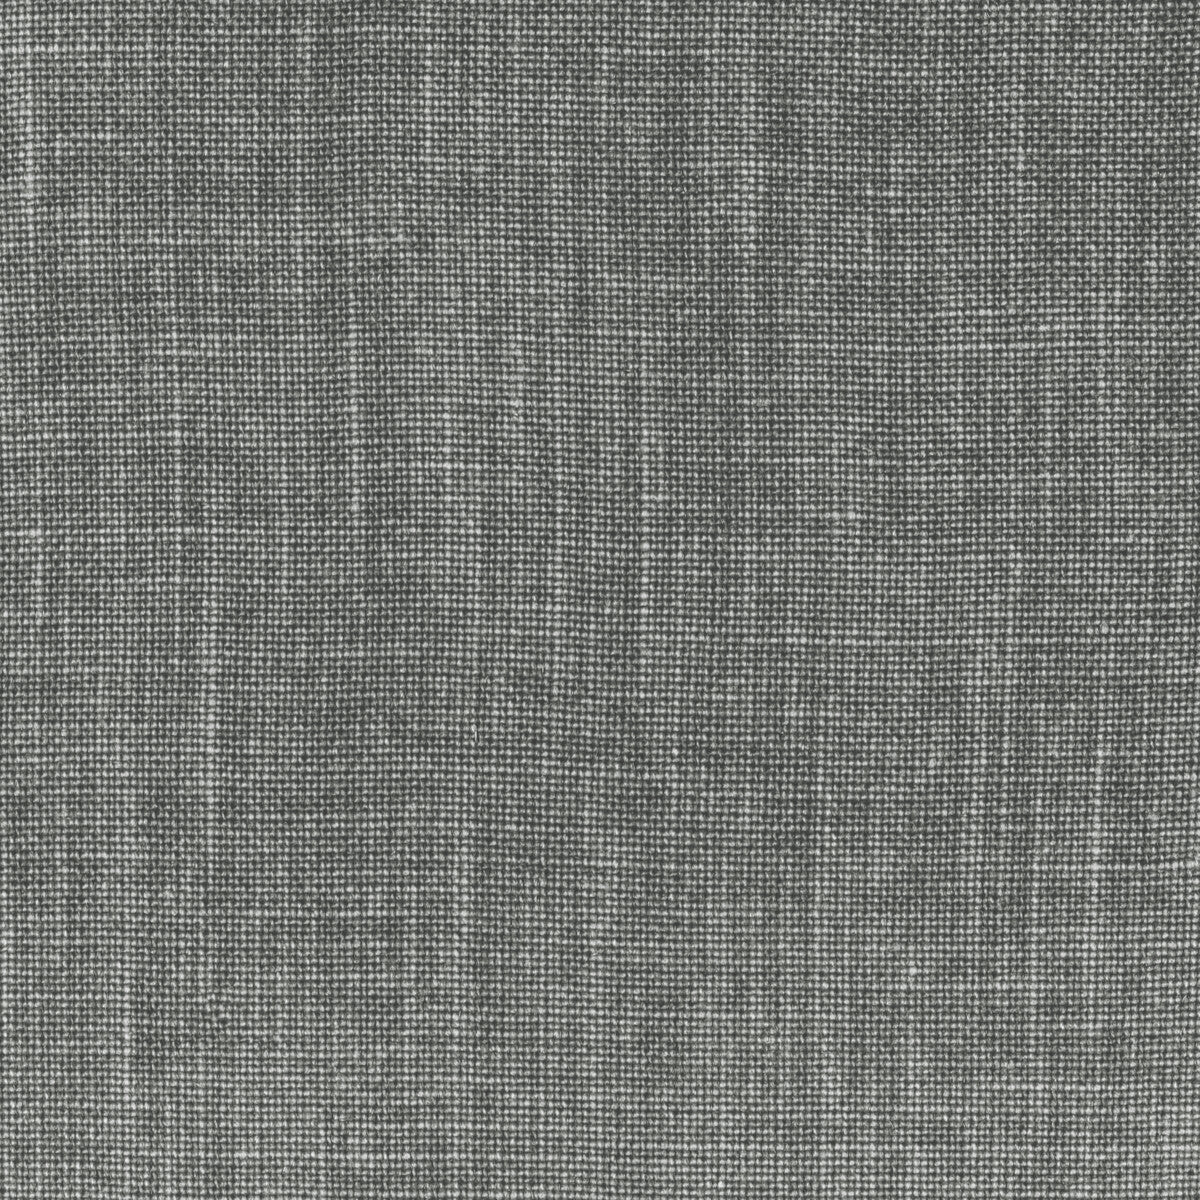 Kath fabric in granite color - pattern 35978.11.0 - by Kravet Design in the Barry Lantz Canvas To Cloth collection